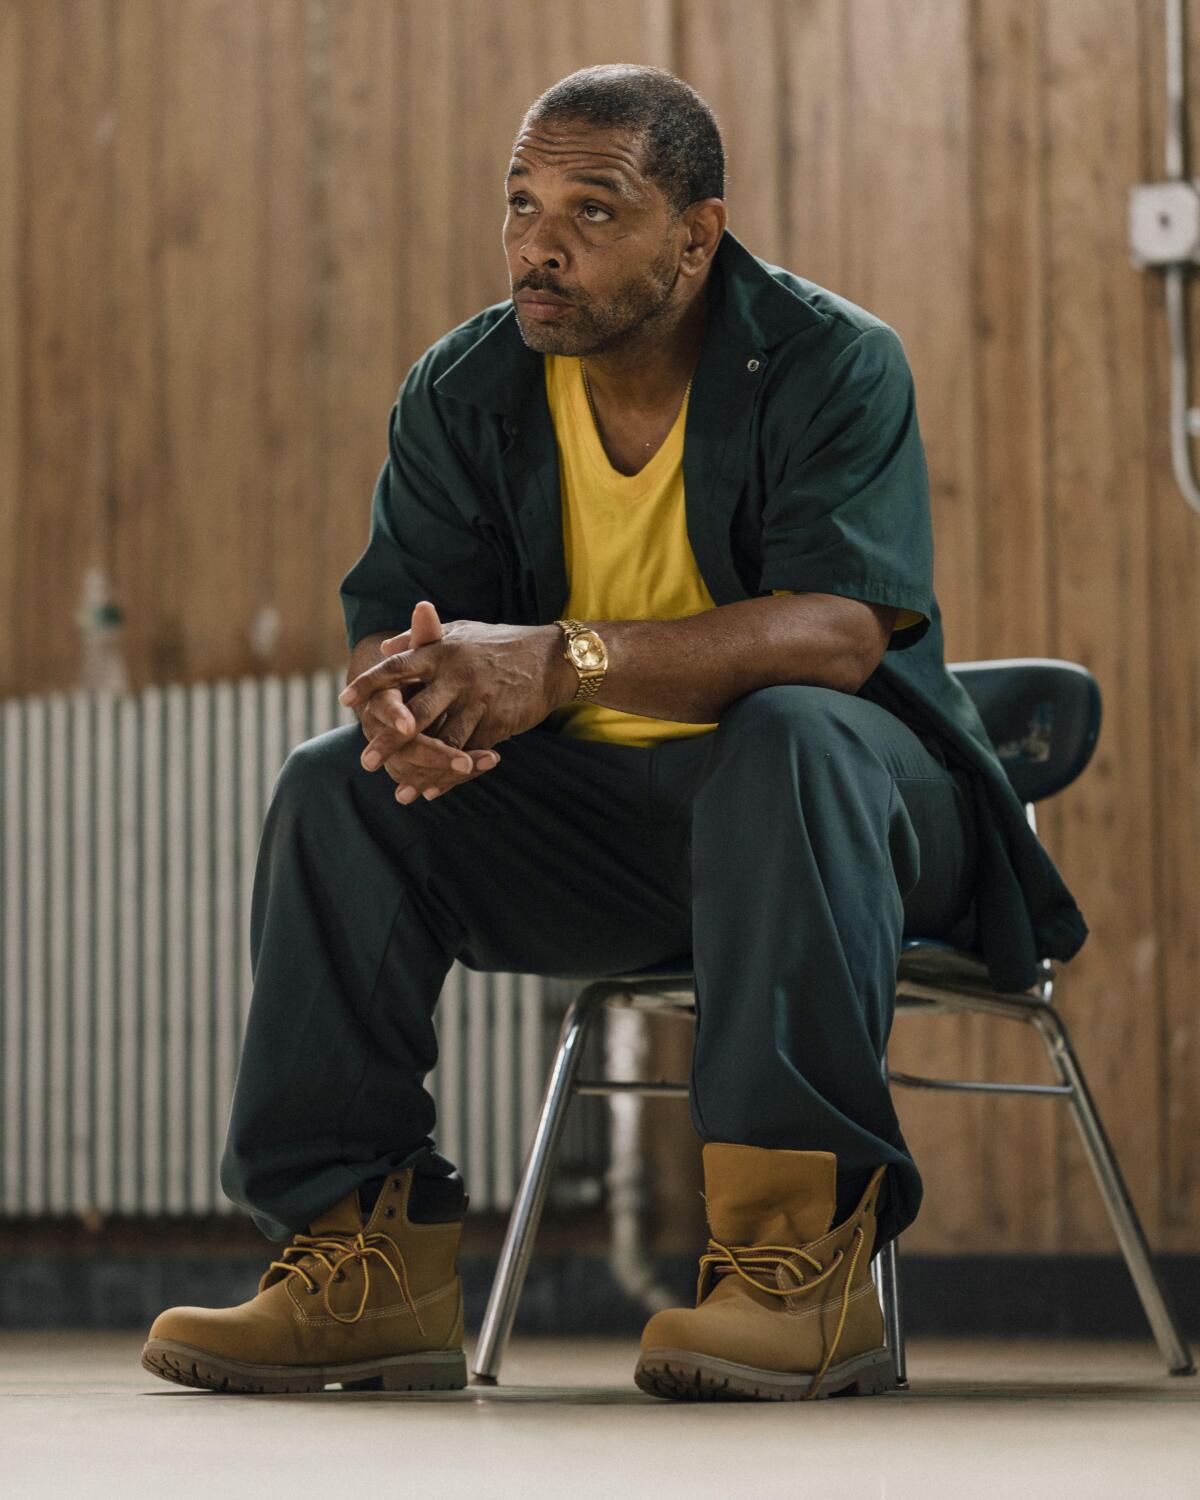 A man in boots and a yellow T-shirt sits in a chair.